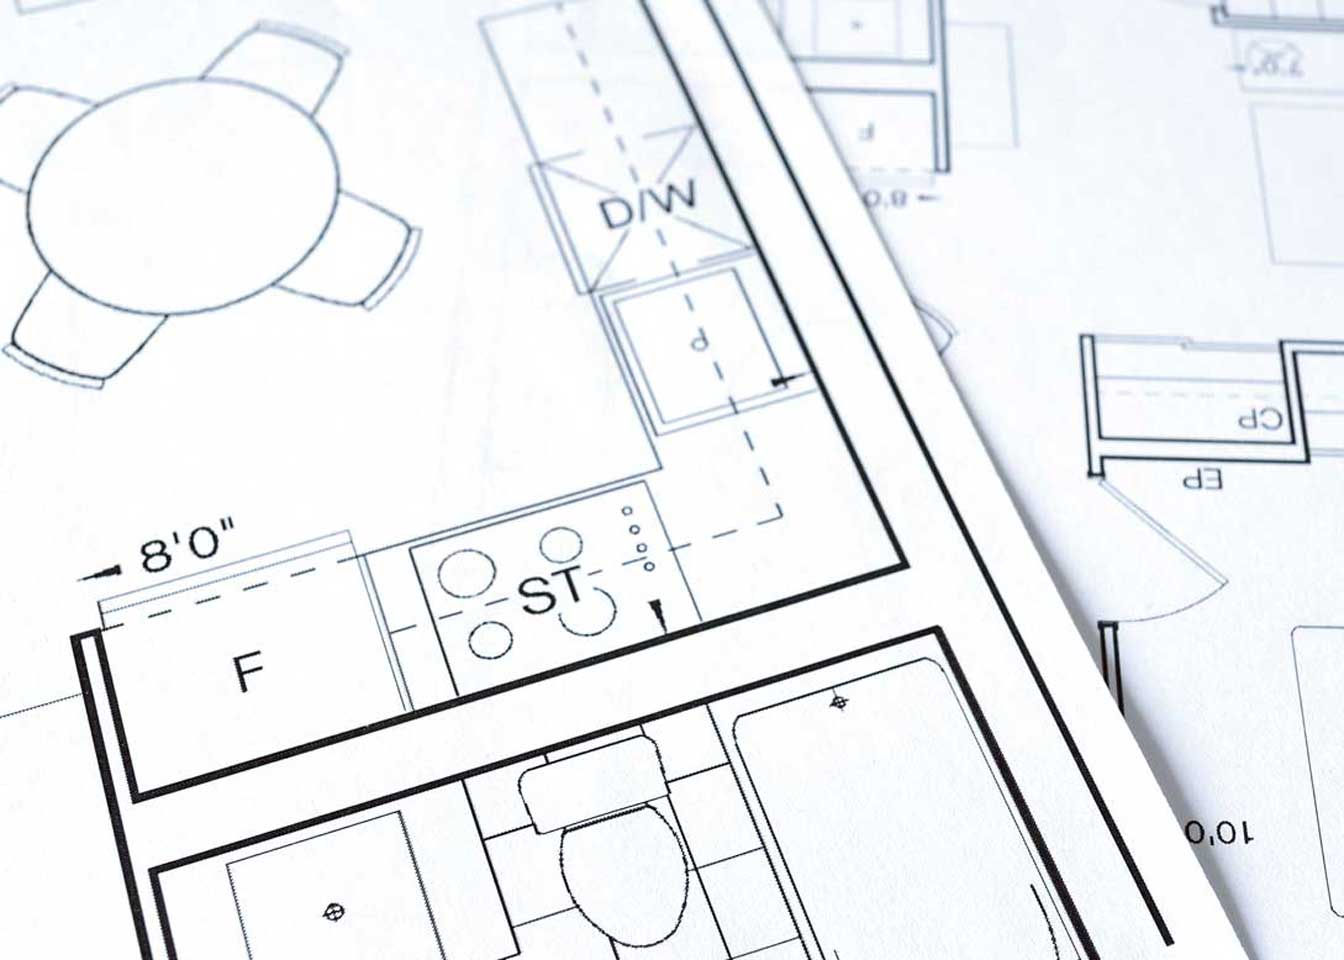 Drafting and design services in Dewitt, MI